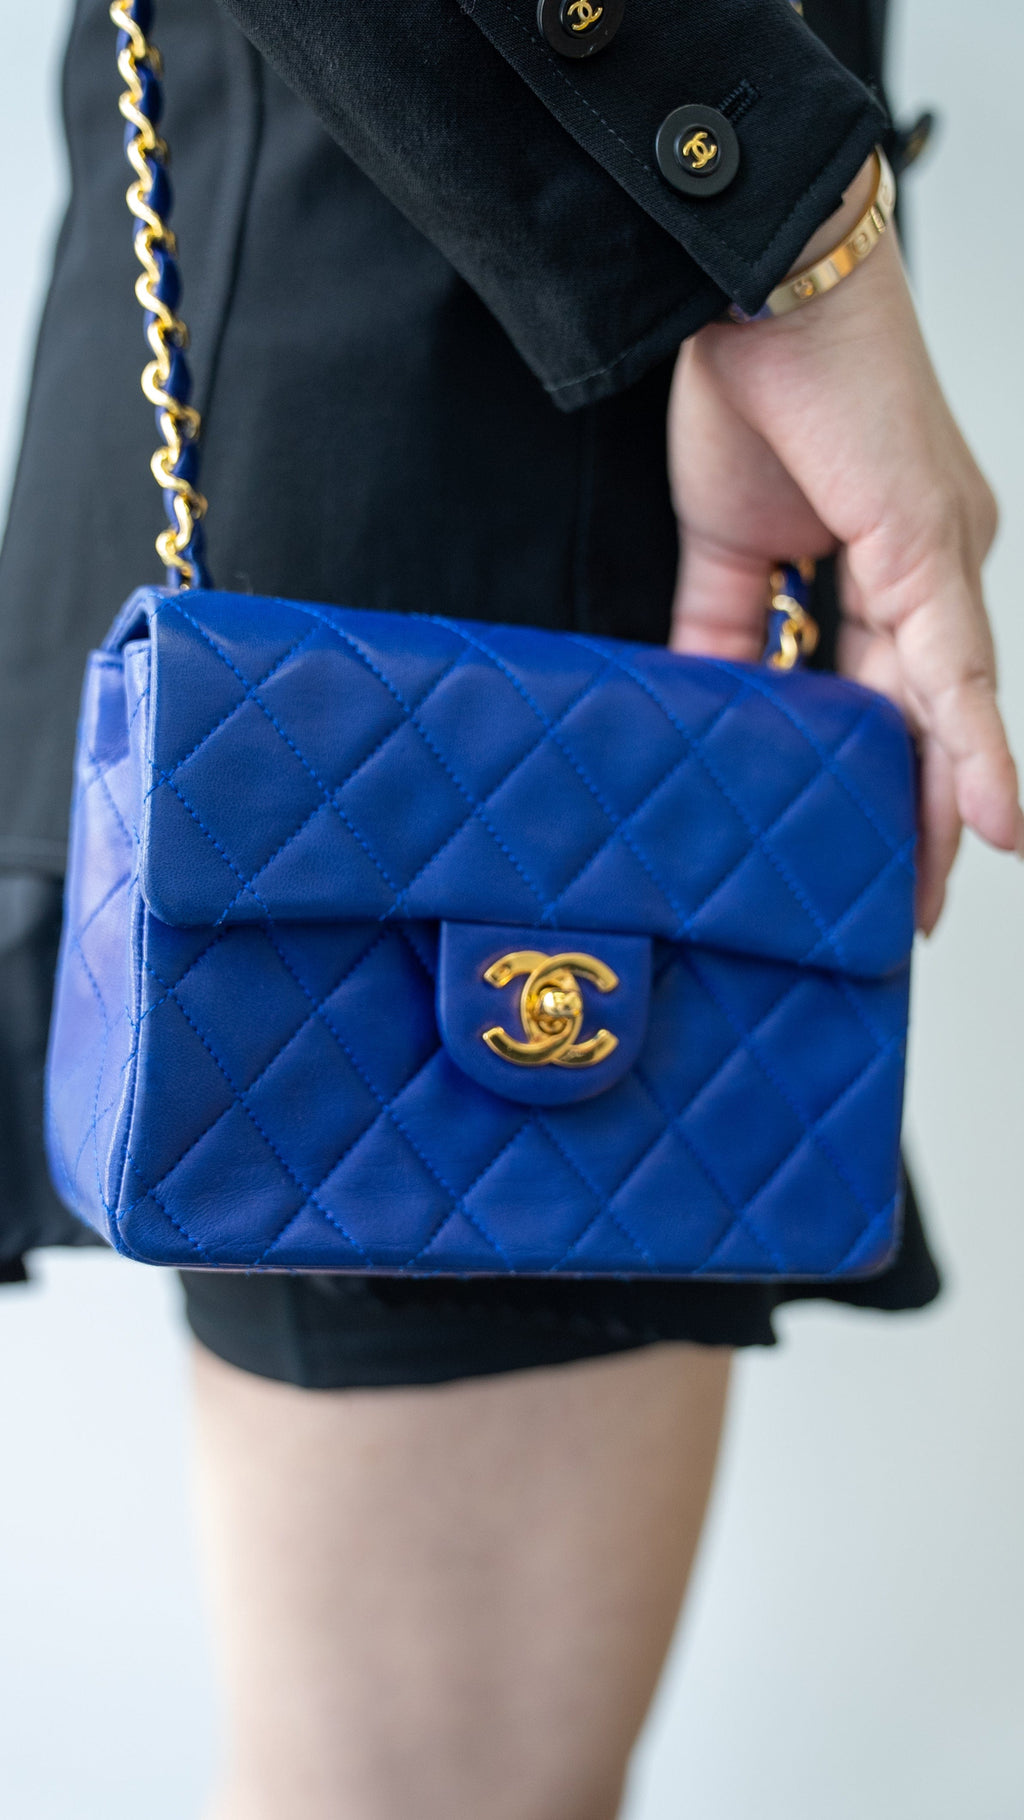 CHANEL Lambskin Quilted Wallet On Chain WOC Royal Blue 38990  FASHIONPHILE